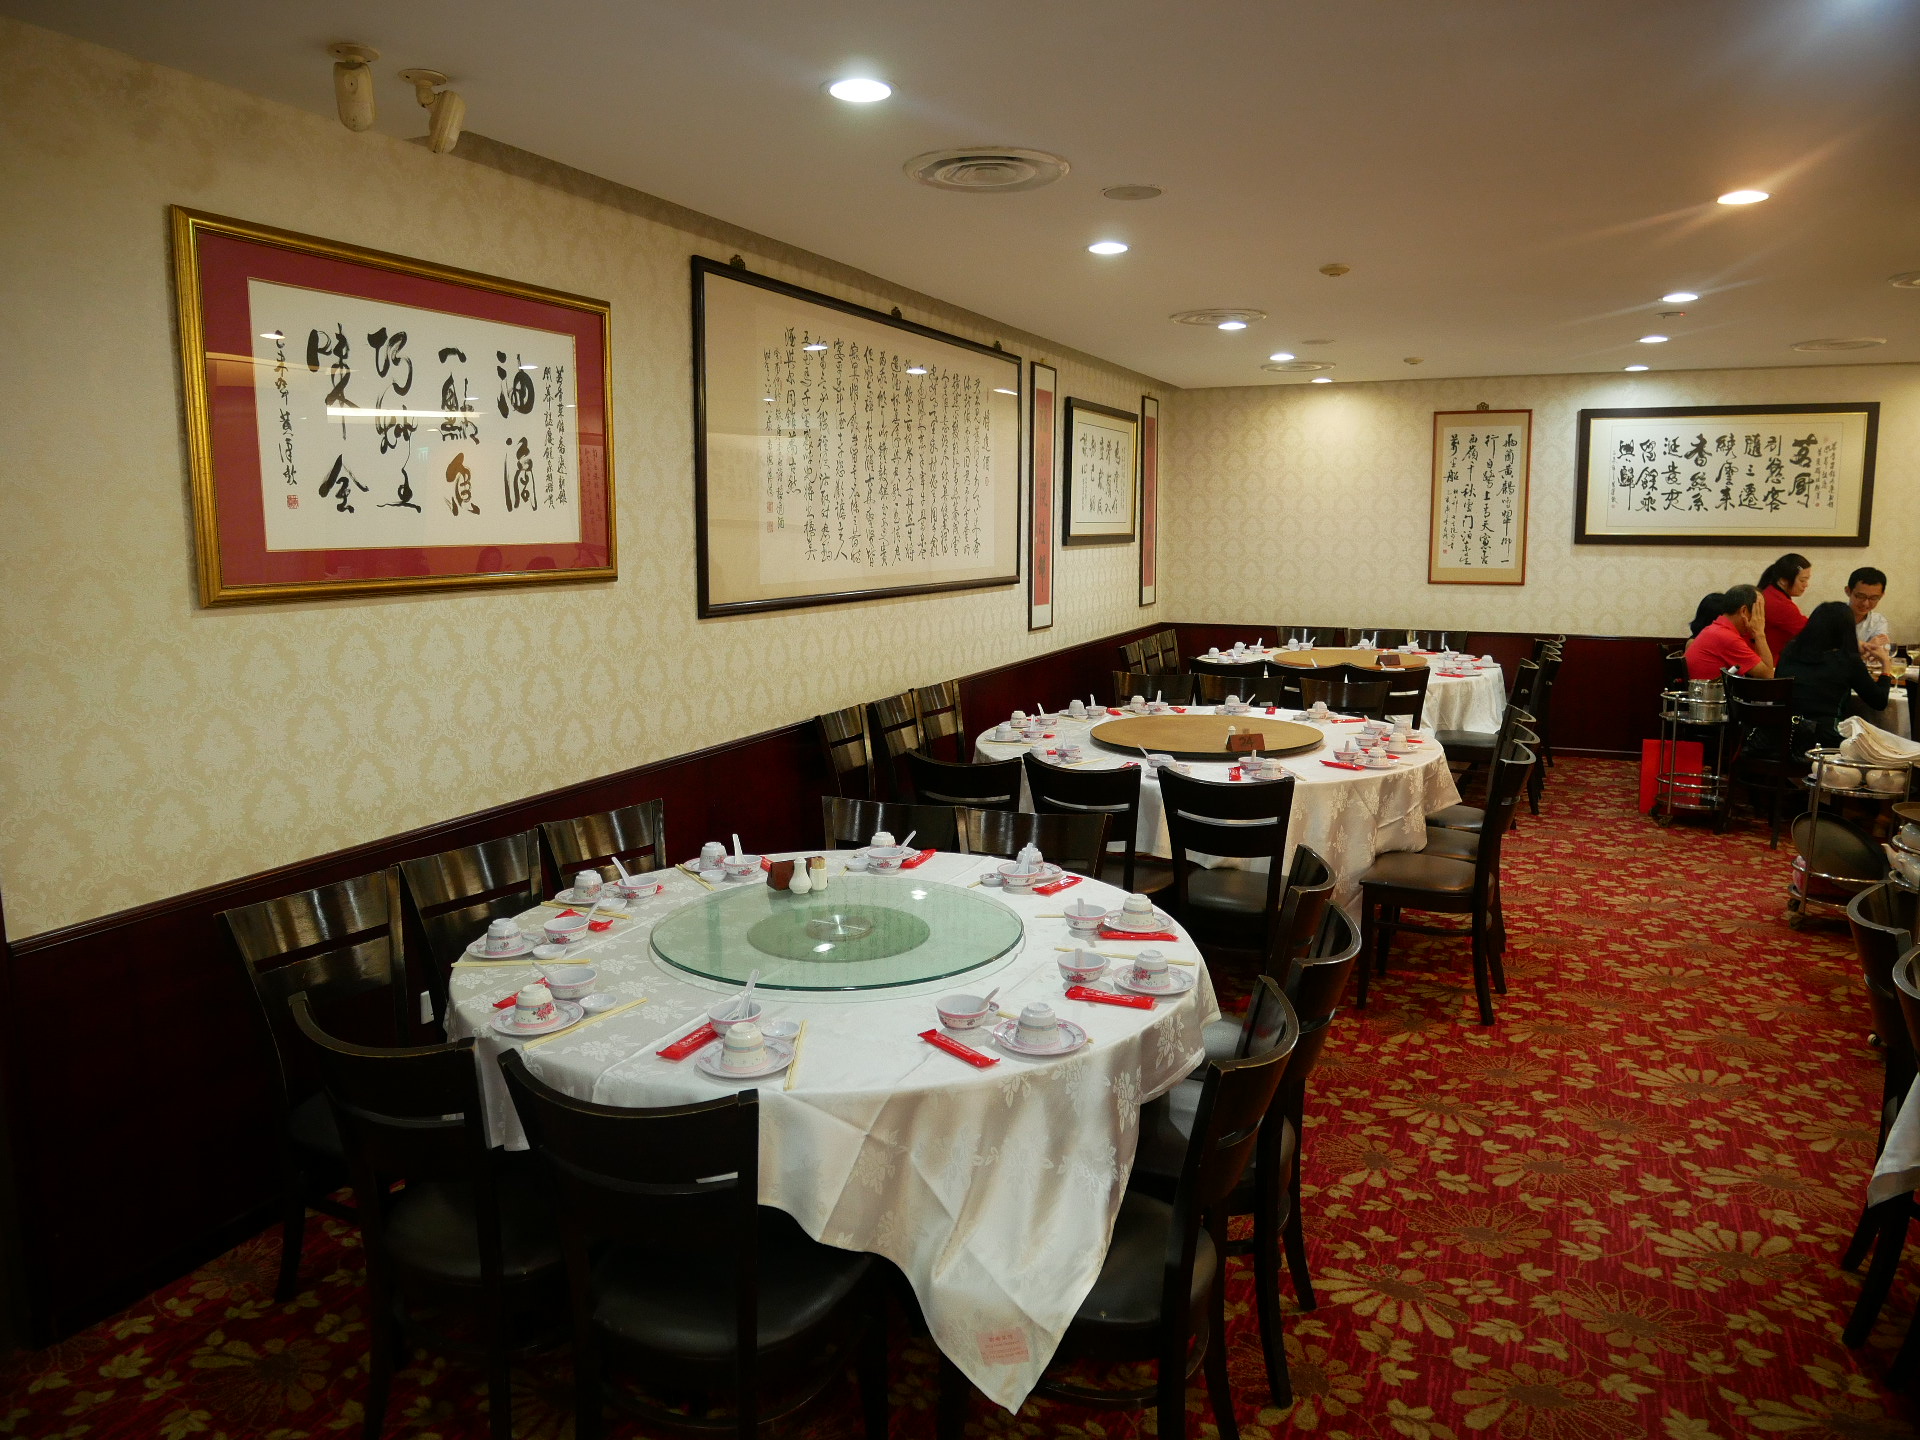 The walls of Mr Ng’s Beng Hiang Hokkien restaurant are adorned with works of calligraphy pertaining to Hokkien cuisine and entrepreneurship.